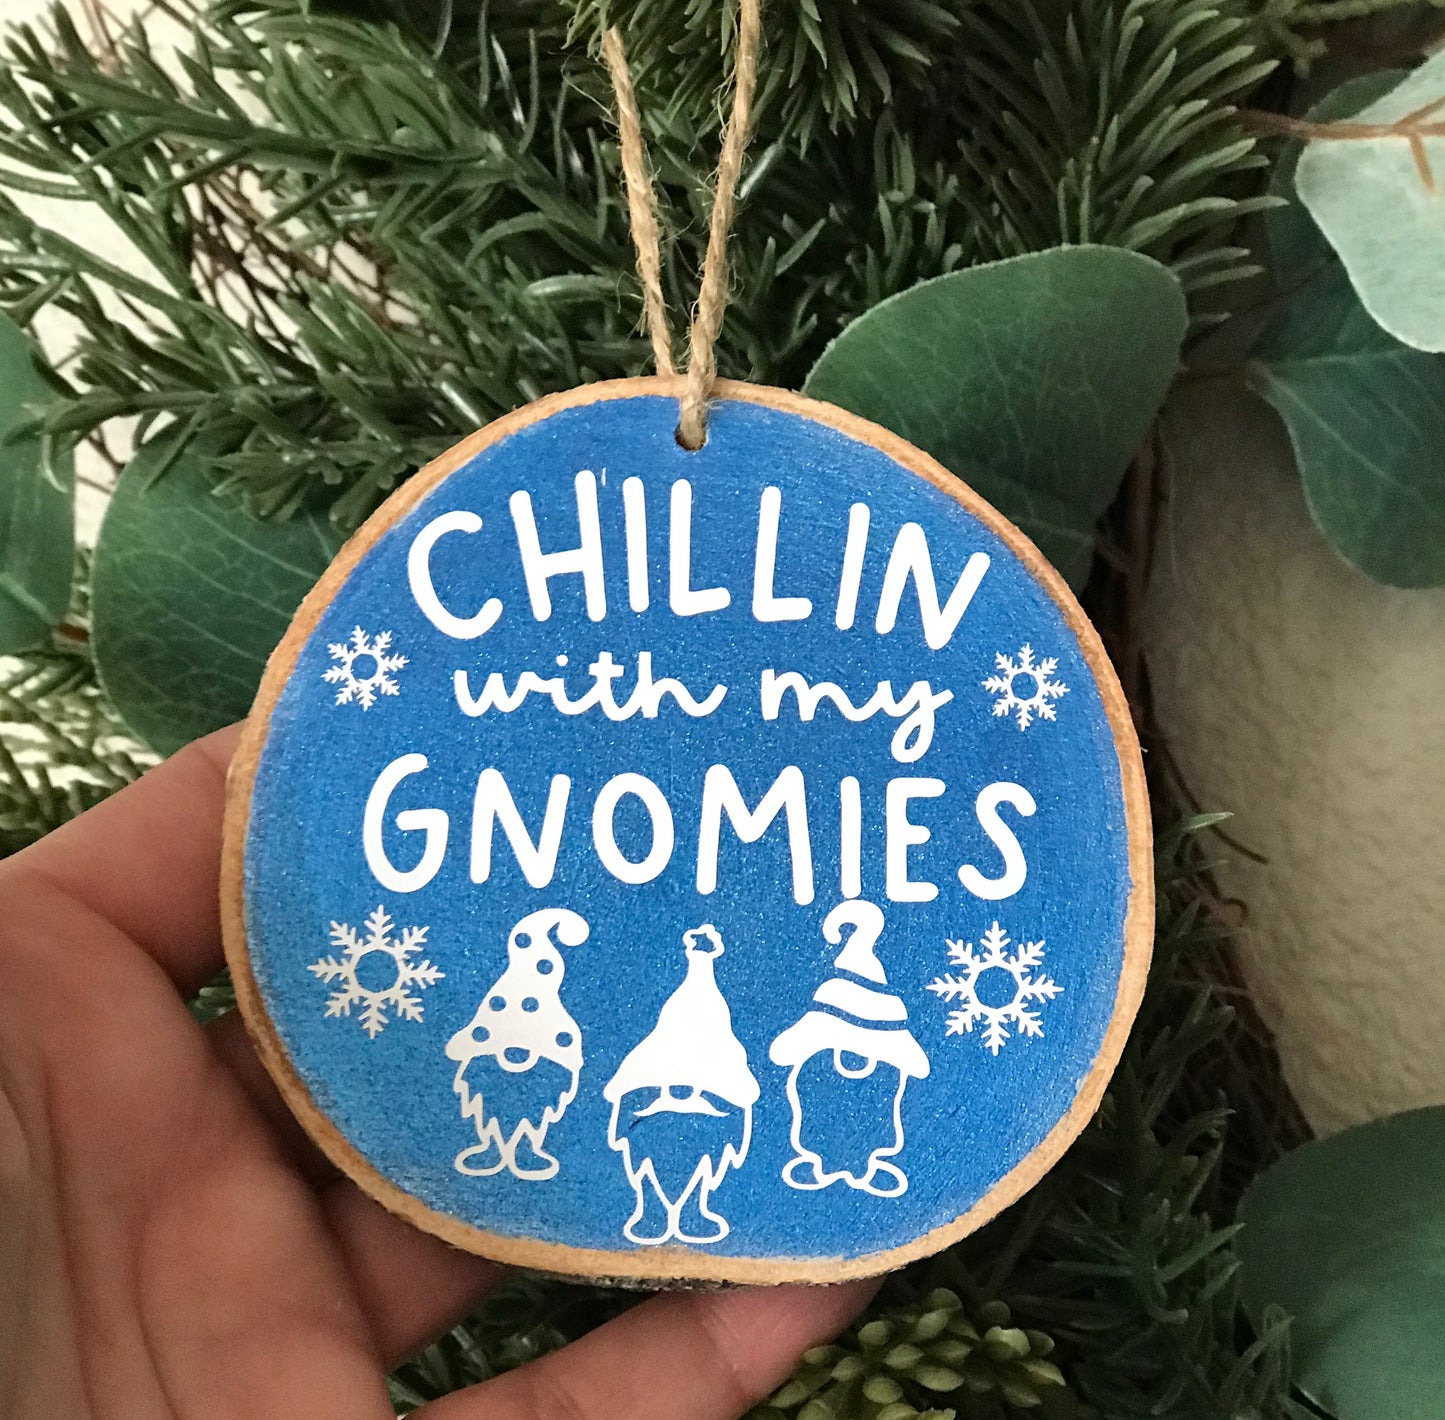 Chillin with my Gnomies Wood Slice Ornament